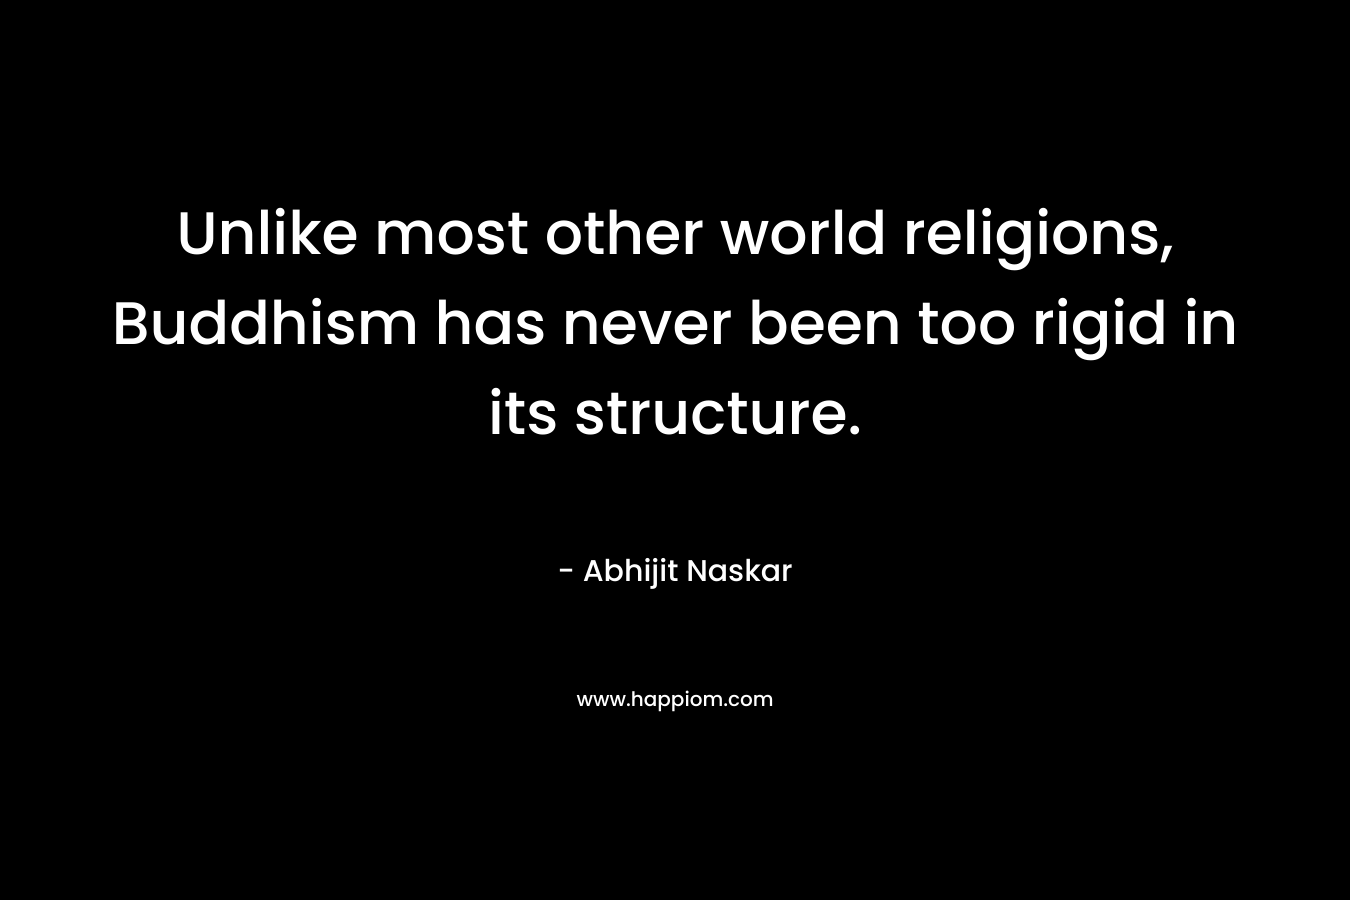 Unlike most other world religions, Buddhism has never been too rigid in its structure. – Abhijit Naskar